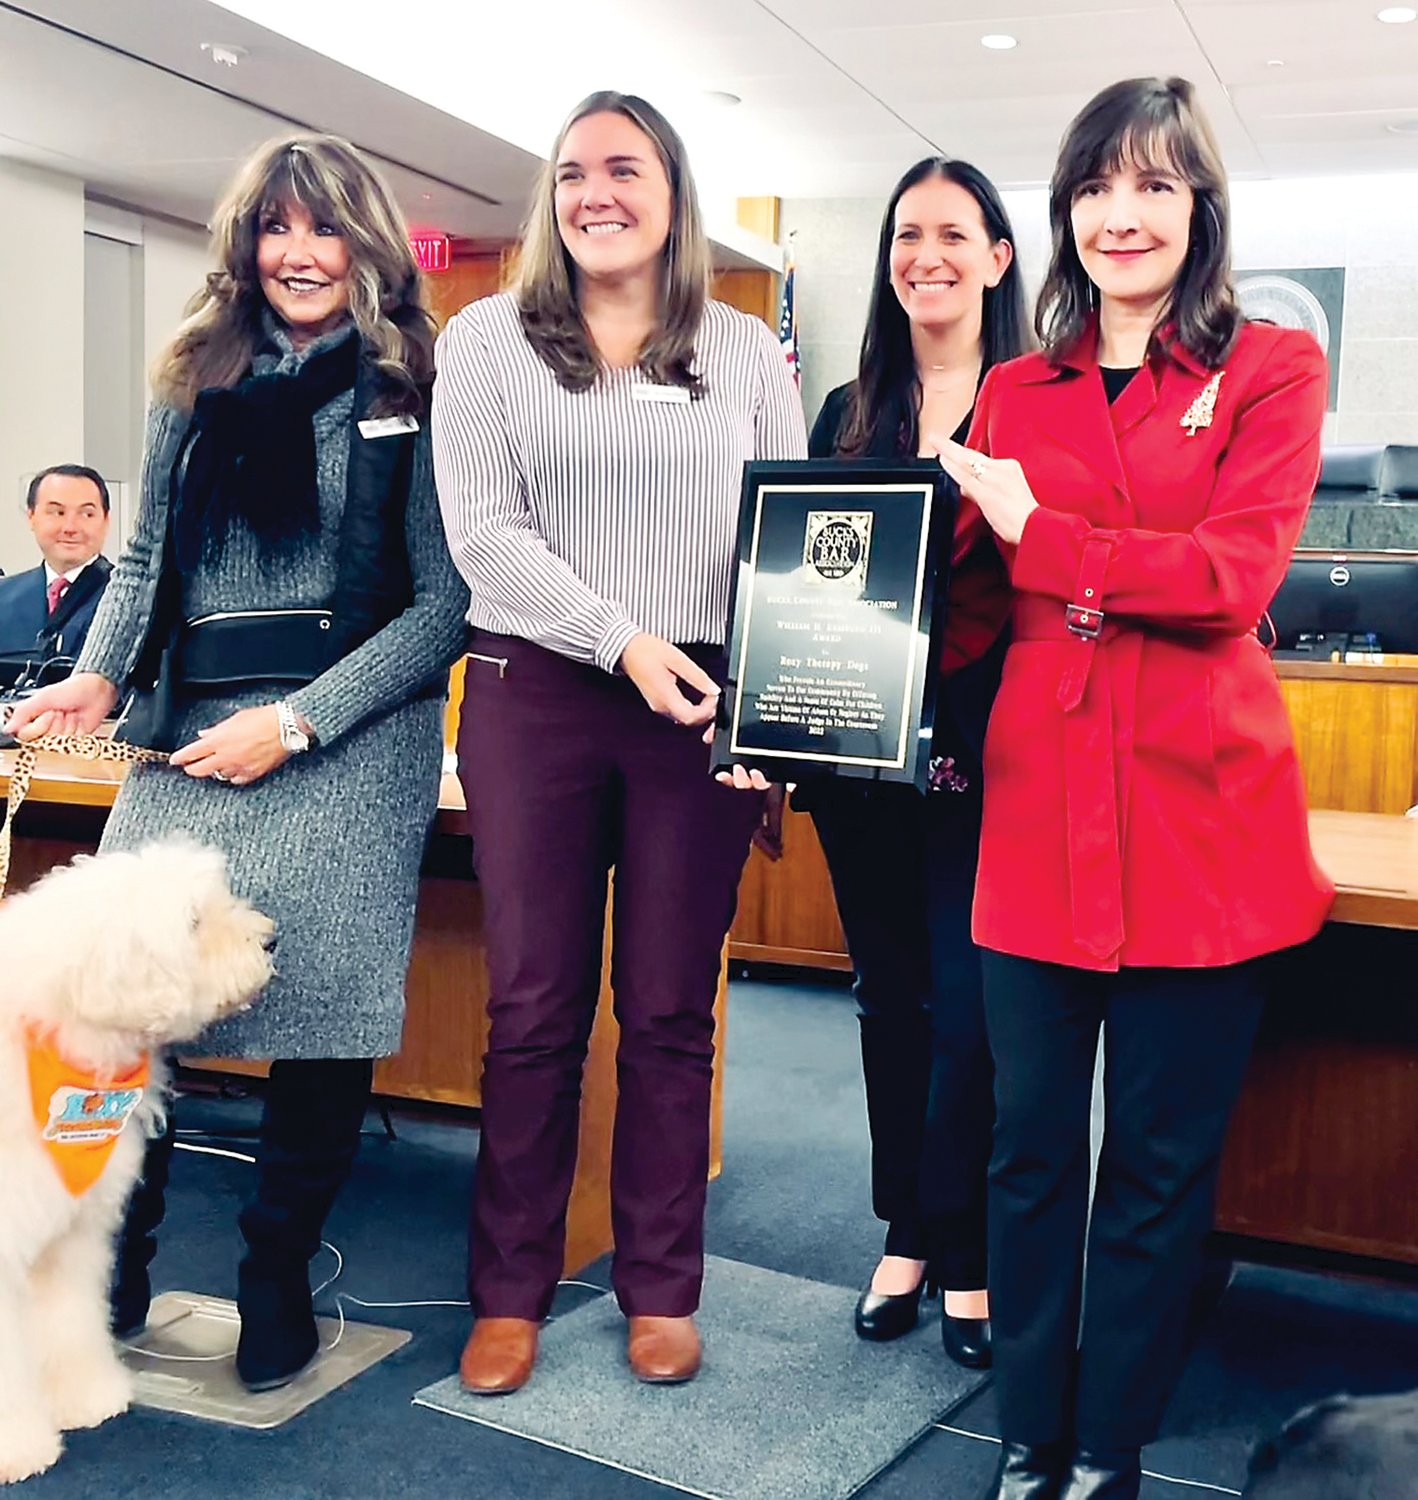 Roxy Therapy Dogs volunteer Daire Goettler and her therapy dog Teagan; Melissa D’Amato, director, Roxy Therapy Dogs Courthouse Program; Grace Deon, partner, Eastburn & Gray; and Julie Goldstein, Bucks County Bar Association outgoing president.